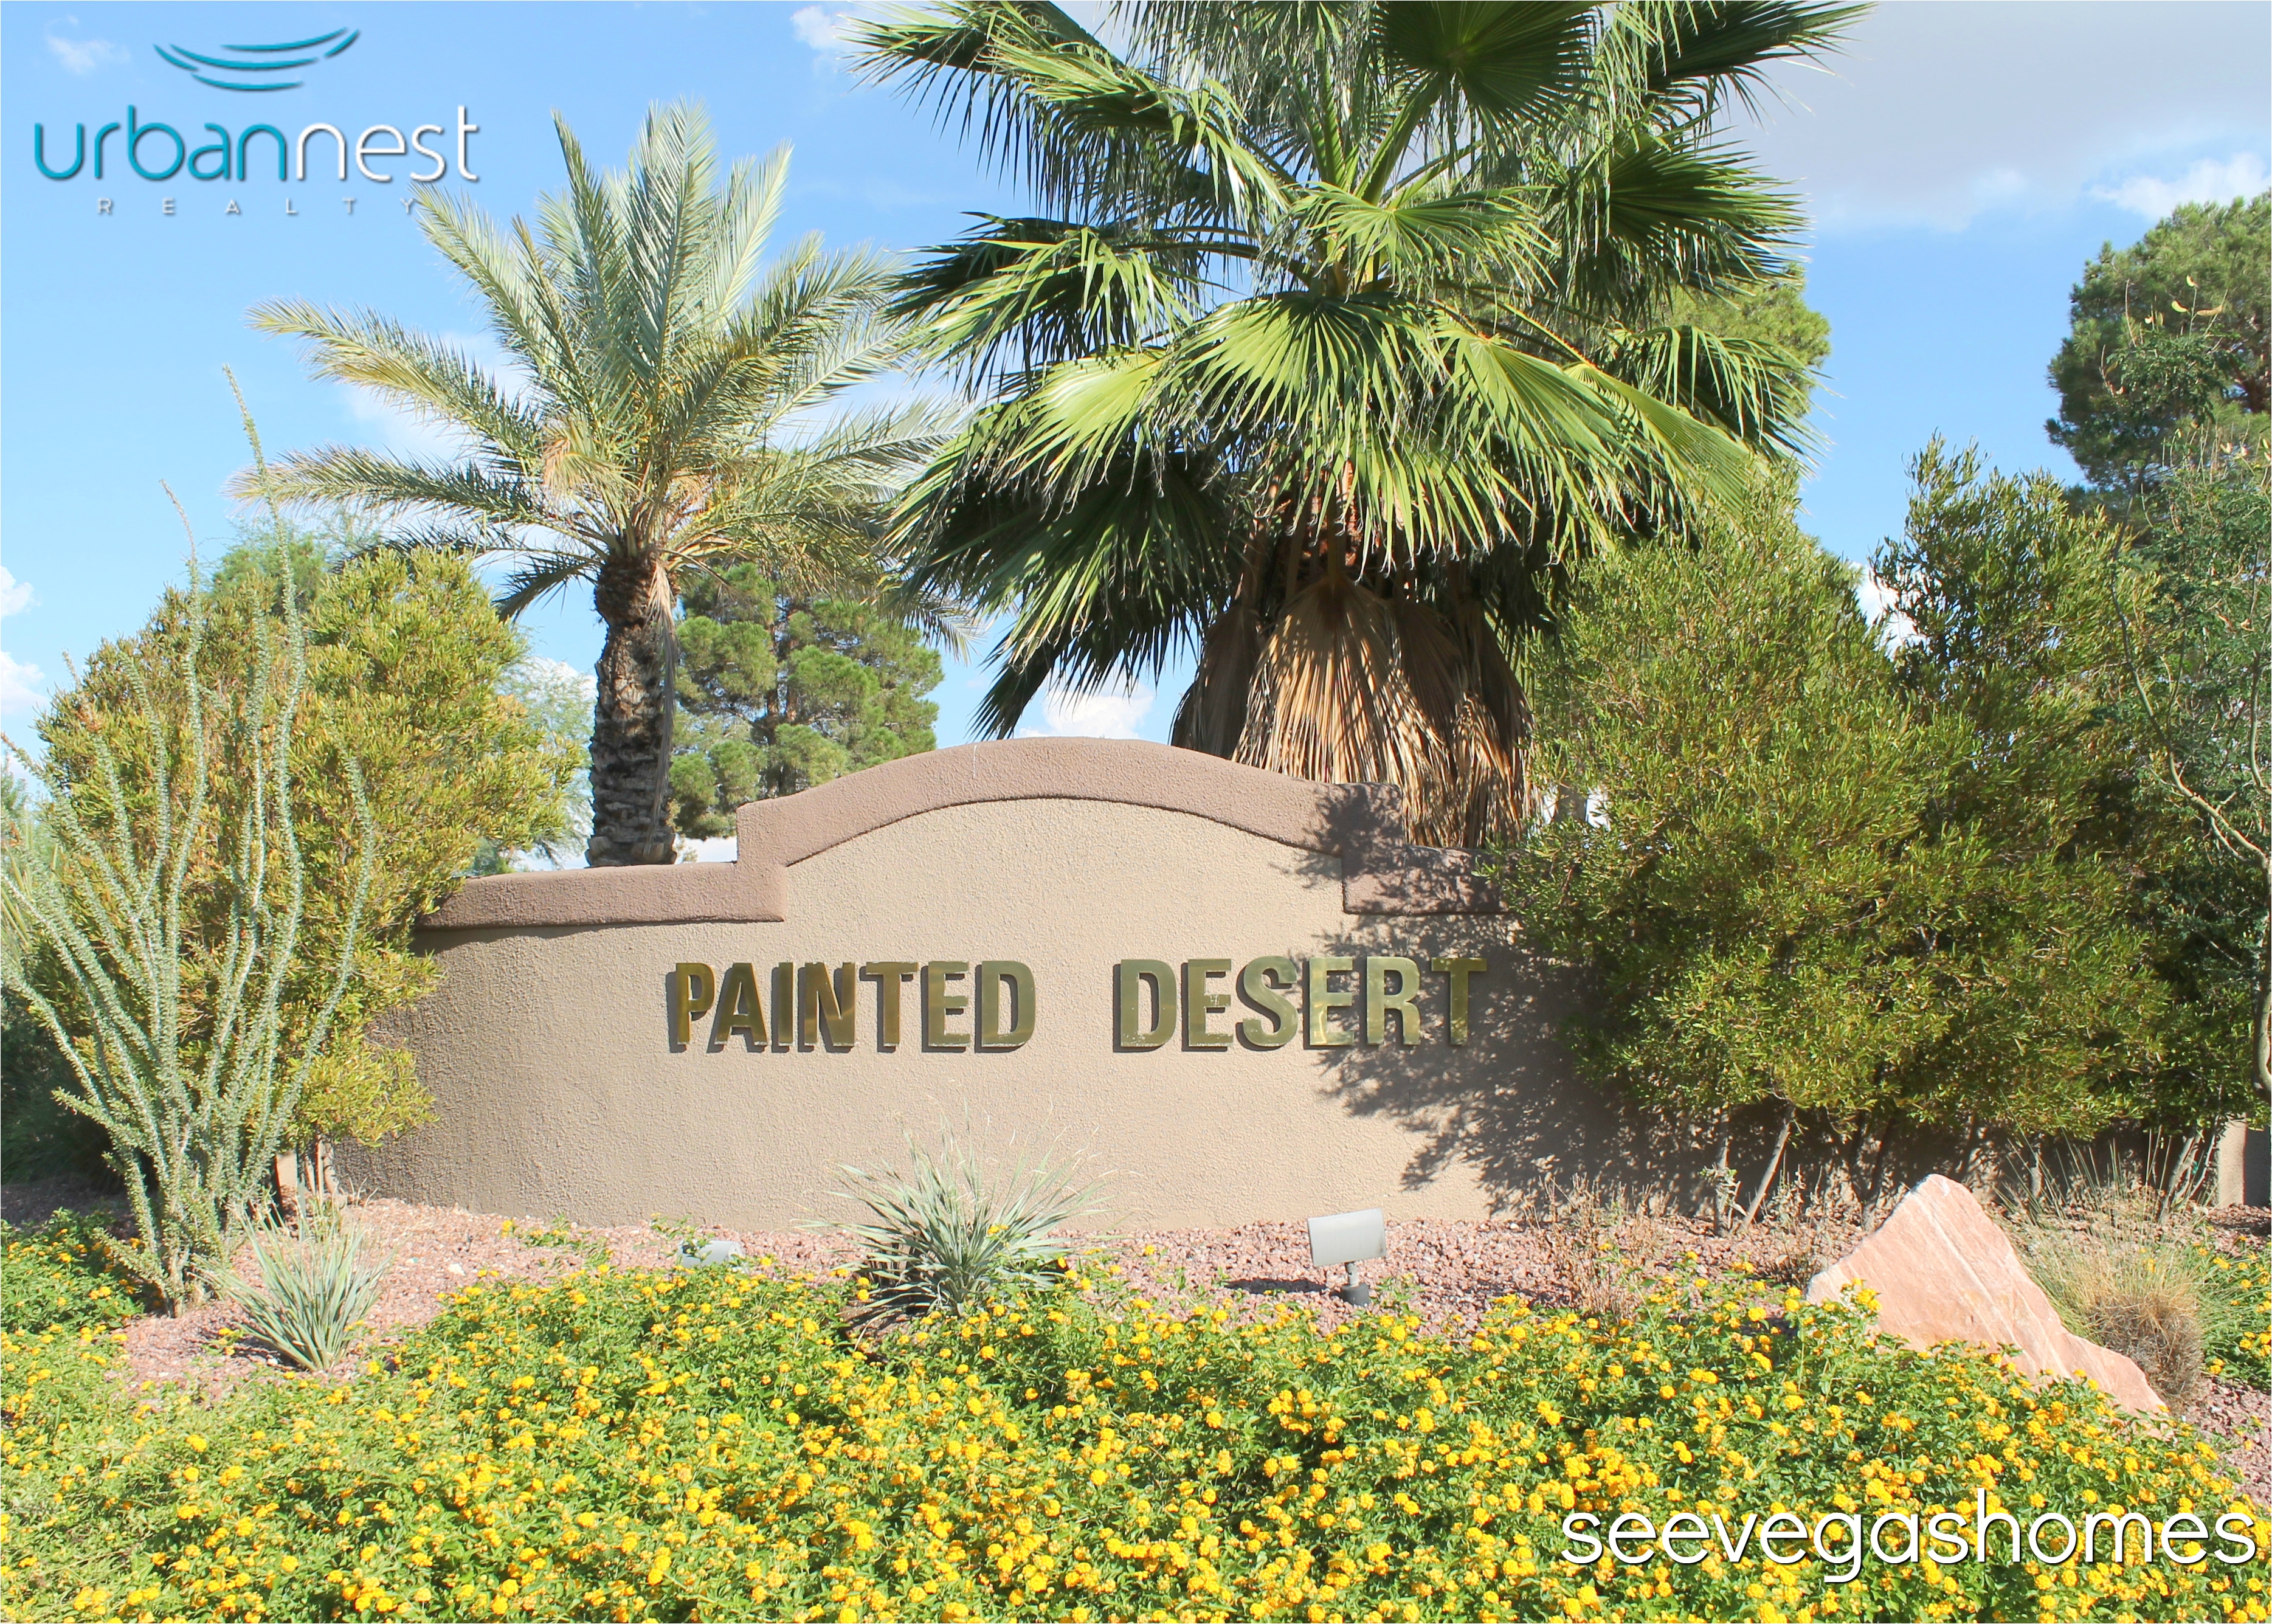 painted desert homes for sale